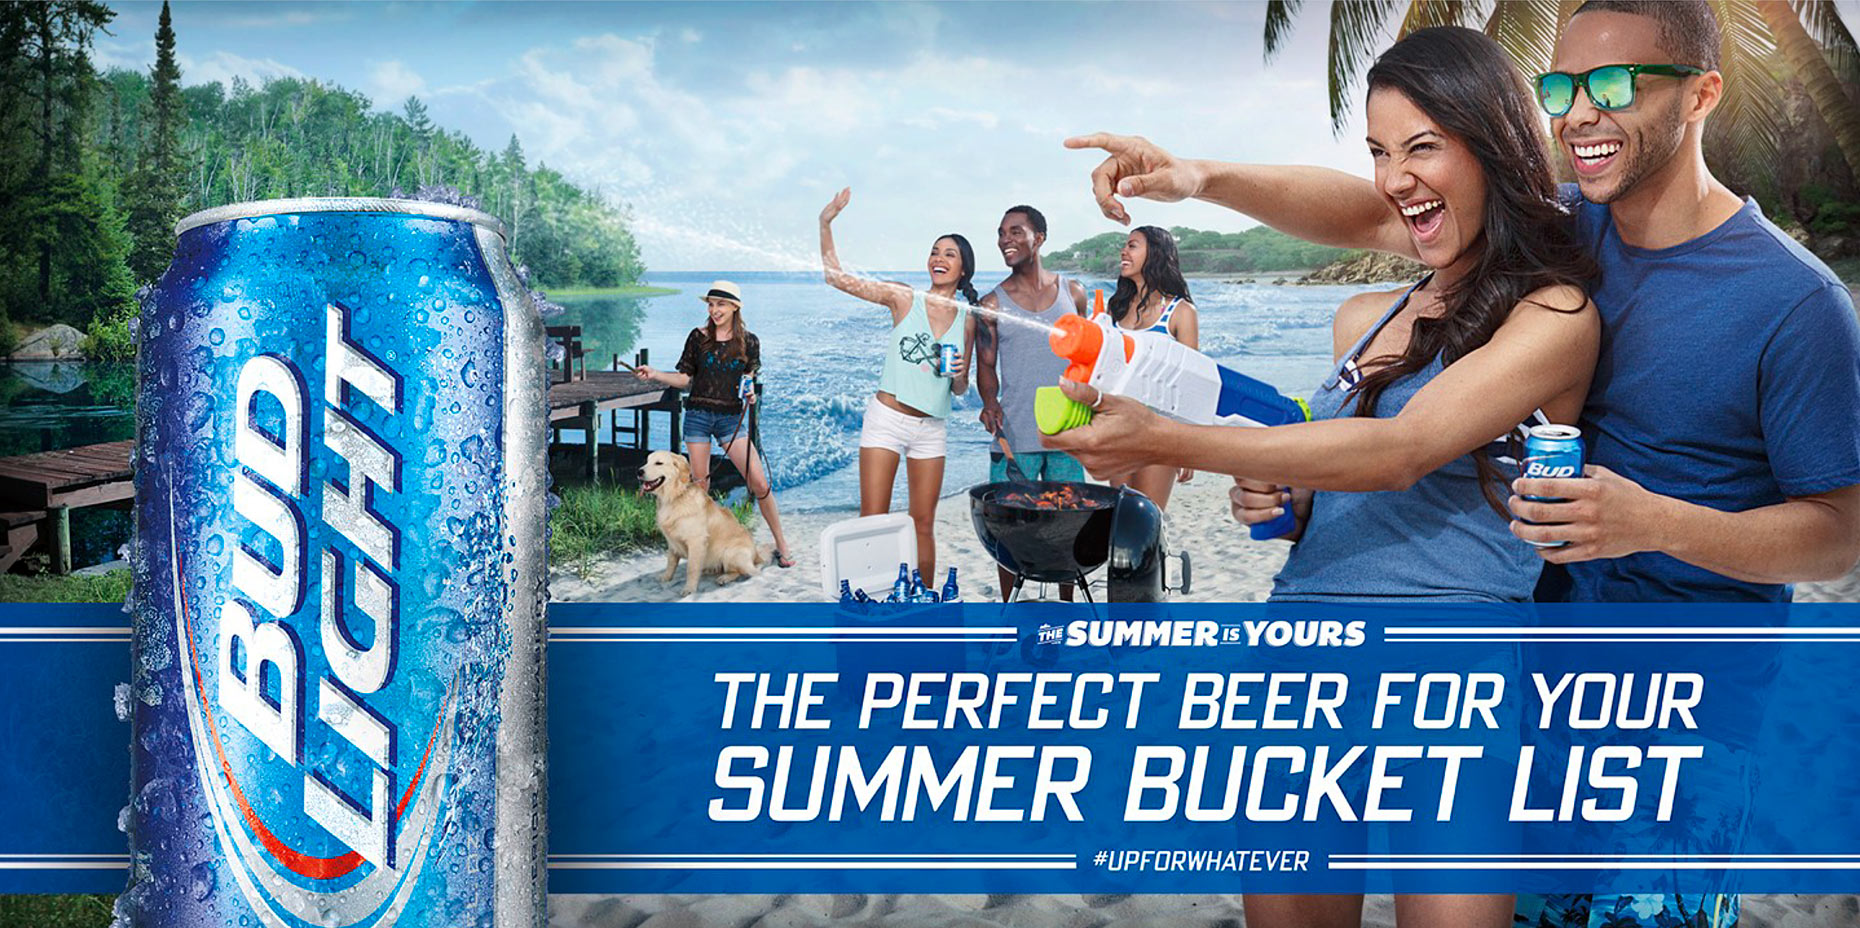 Anheuser Busch Ad Campaign